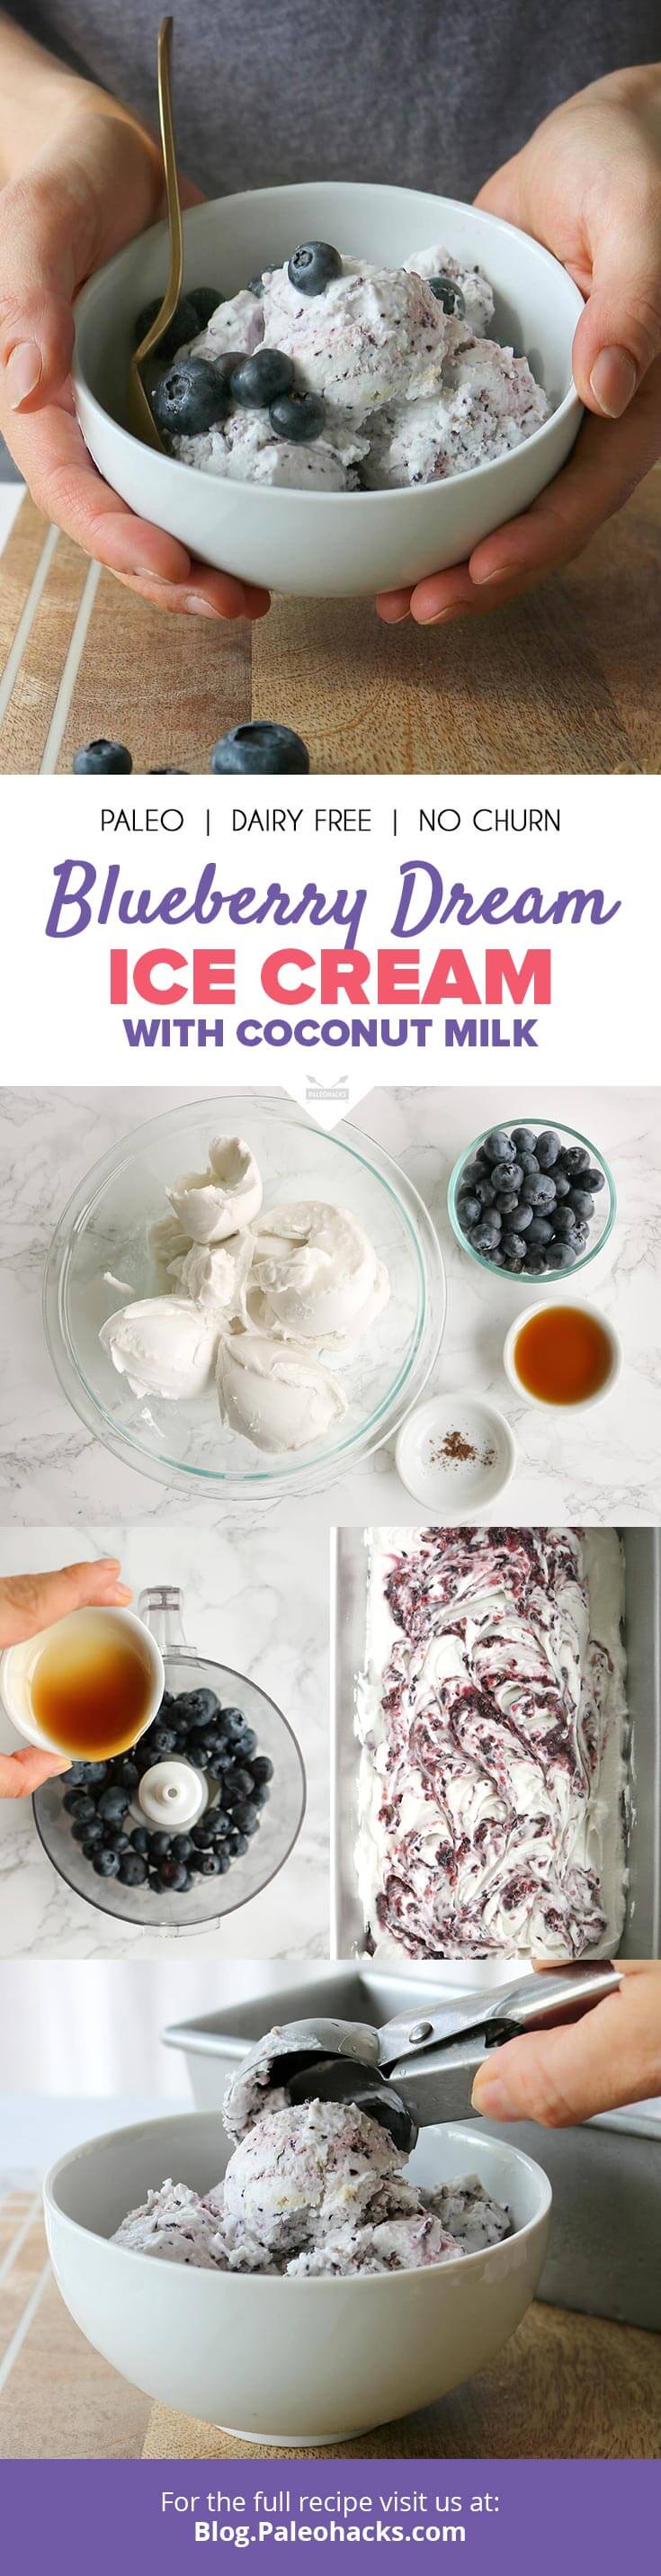 Lightly sweet and ultra-creamy, this dairy-free blueberry ice cream is made from whipped coconut cream for a rippled frozen treat just in time for summer.